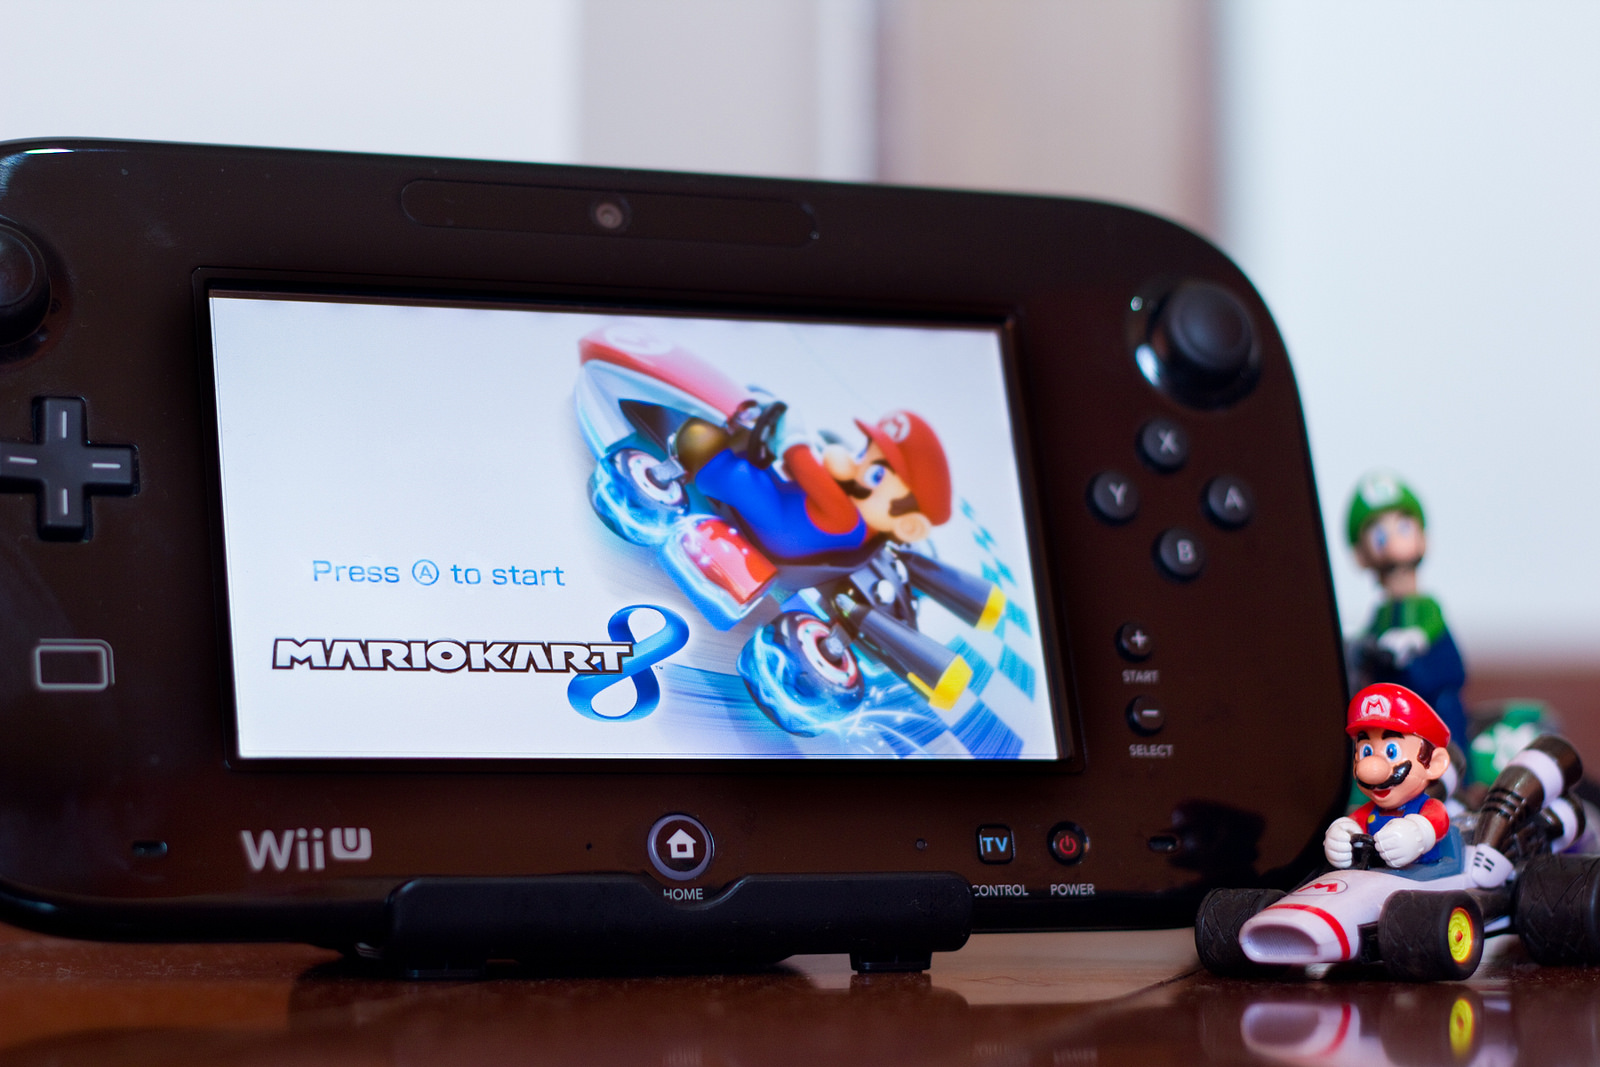 How to Play Wii U Games on Your PC With Cemu